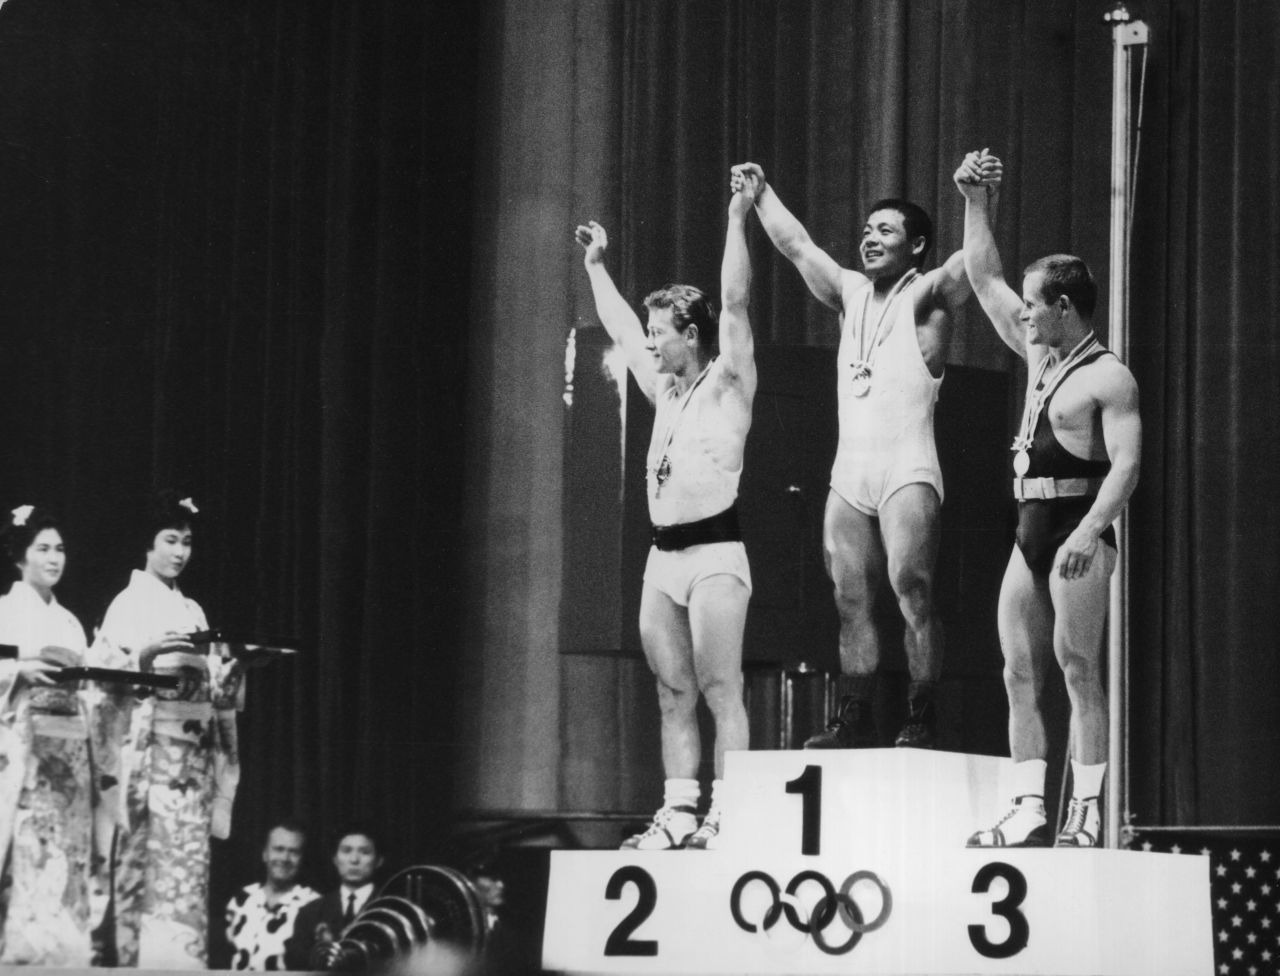 The three winners of the featherweight weightlifting event on October 14, 1964. From left to right, they are Isaac Berger of the U.S. (silver), Yoshinobu Miyake of Japan (gold) and Mieczyslaw Nowak of Poland (bronze). 